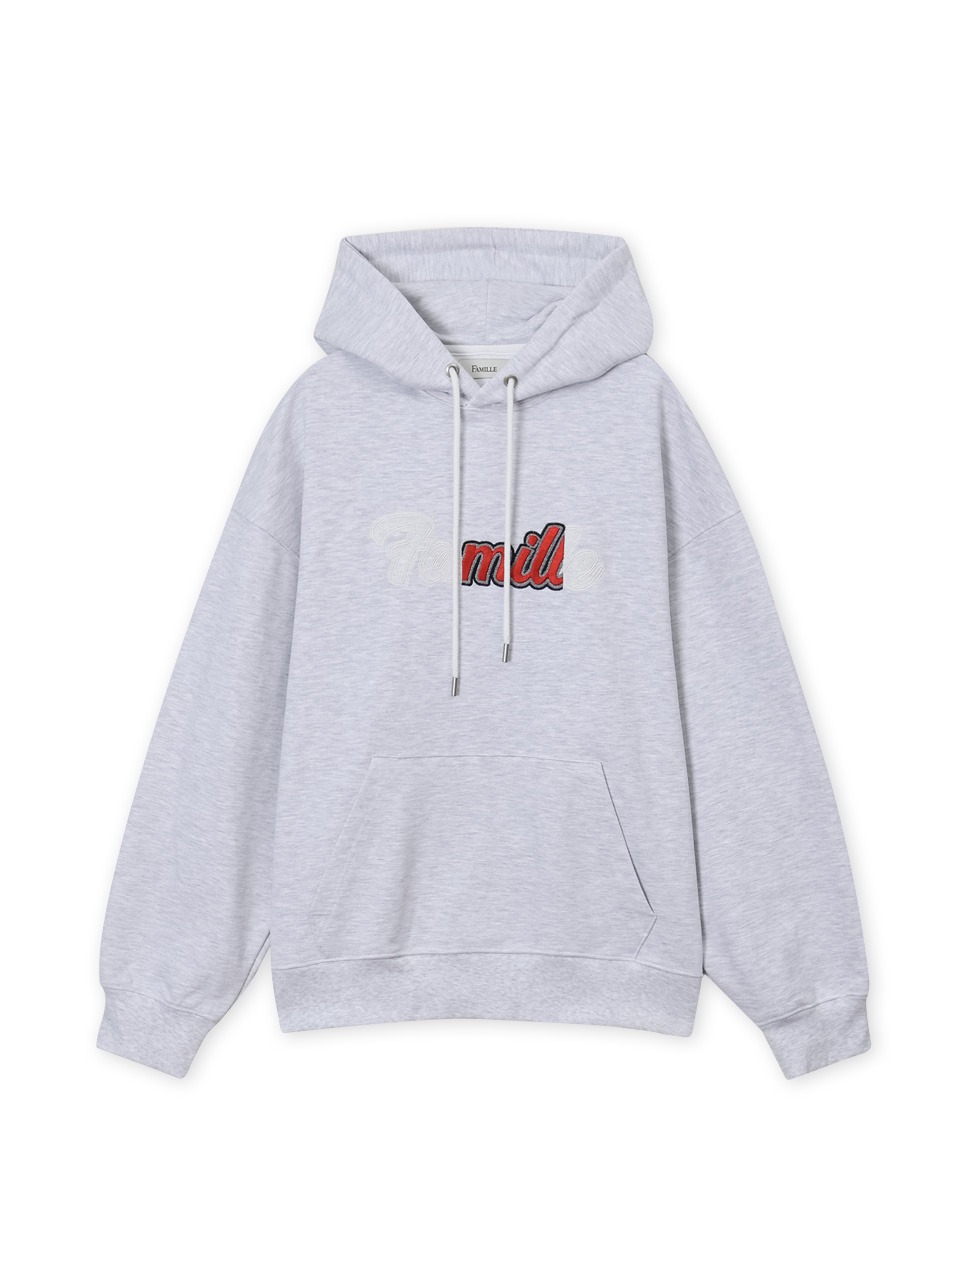 FAMILLE - CONTRAST EMBROIDERY OVERSIZED HOODIE (MELANGE GRAY)